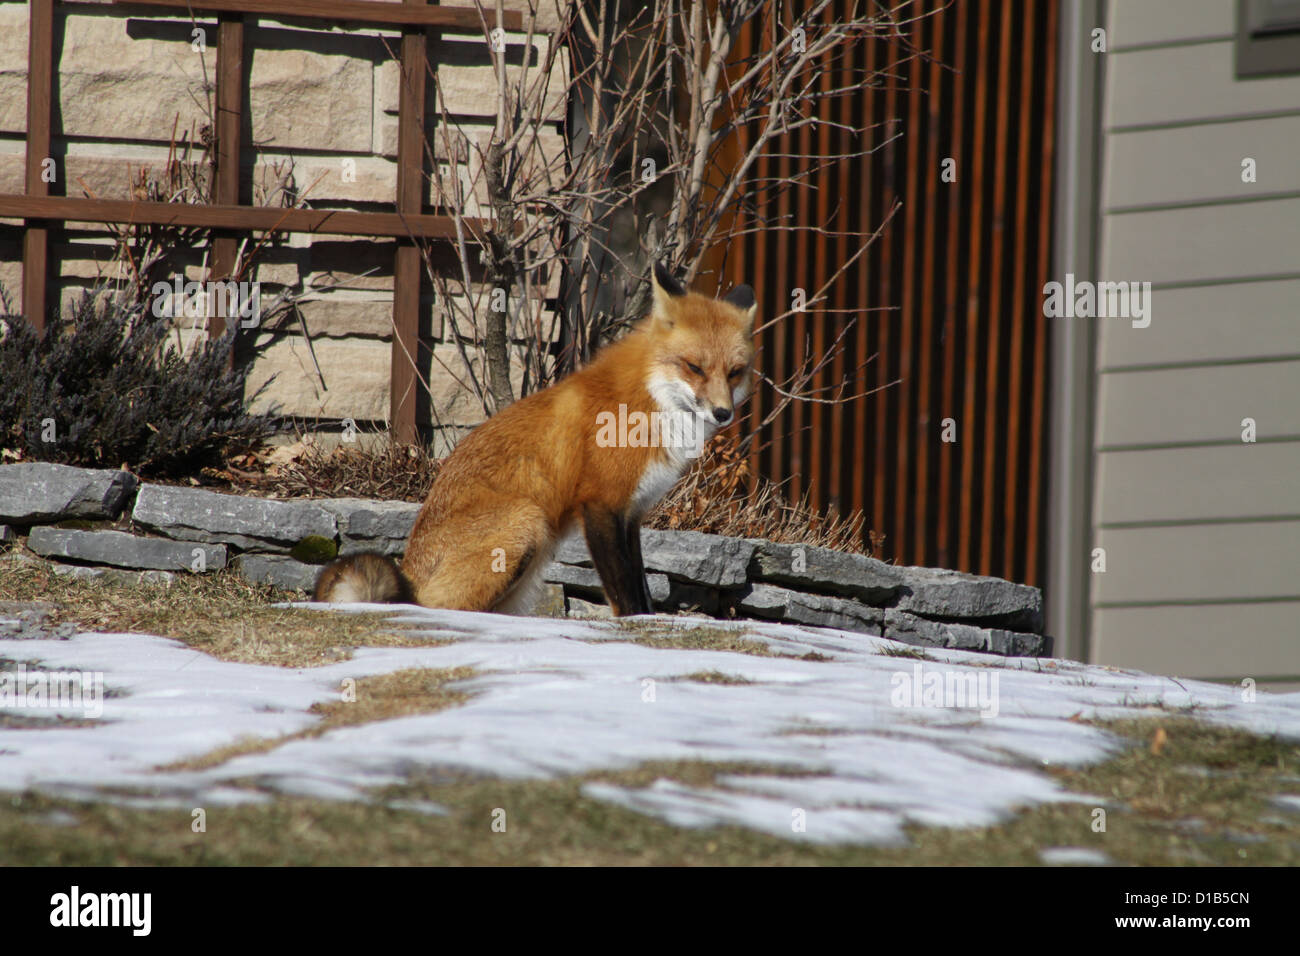 Wild, Red Fox sitting on a partially snow covered grass yard of a house in the suburbs of a small city. Stock Photo